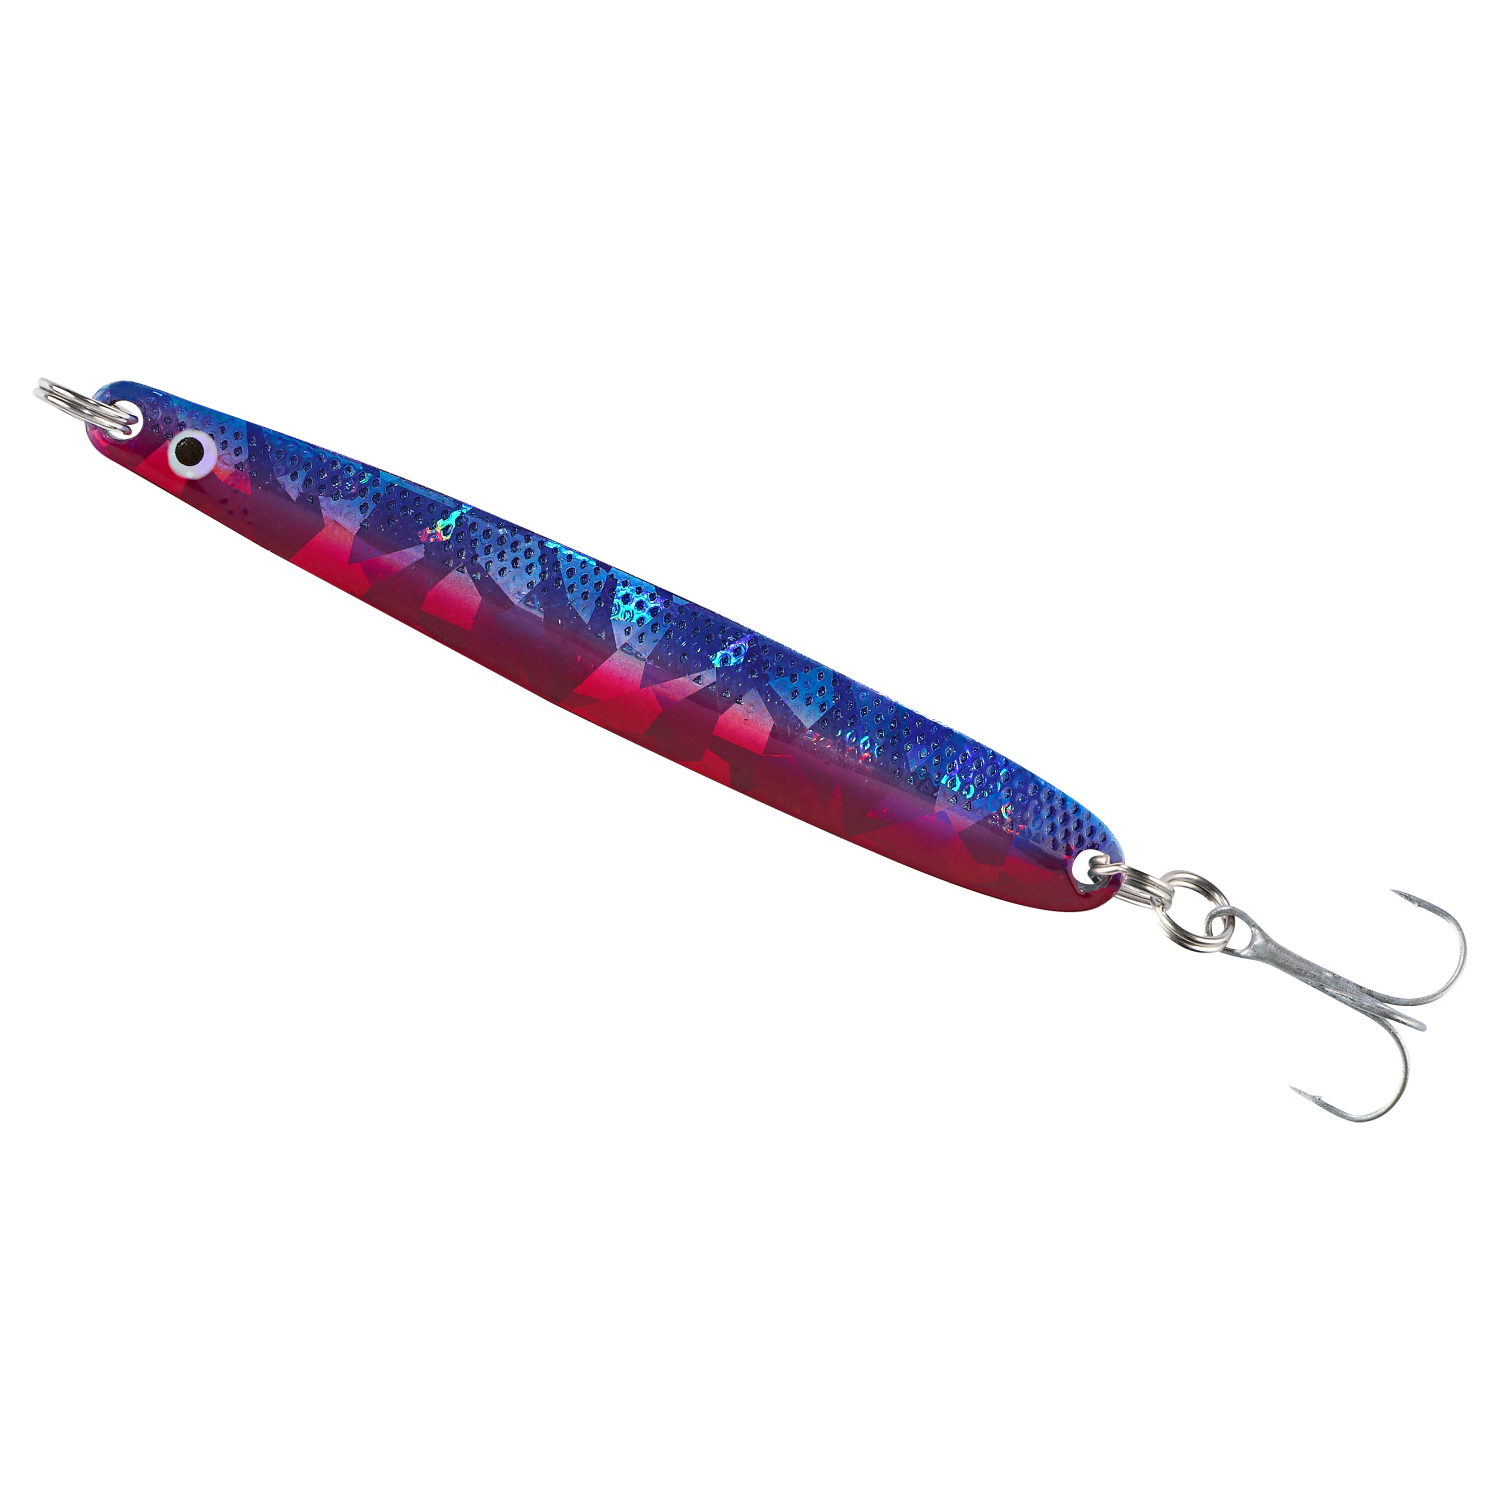 Colonel Sea Trout Spoon Z Seatrout II (blue/red) at low prices